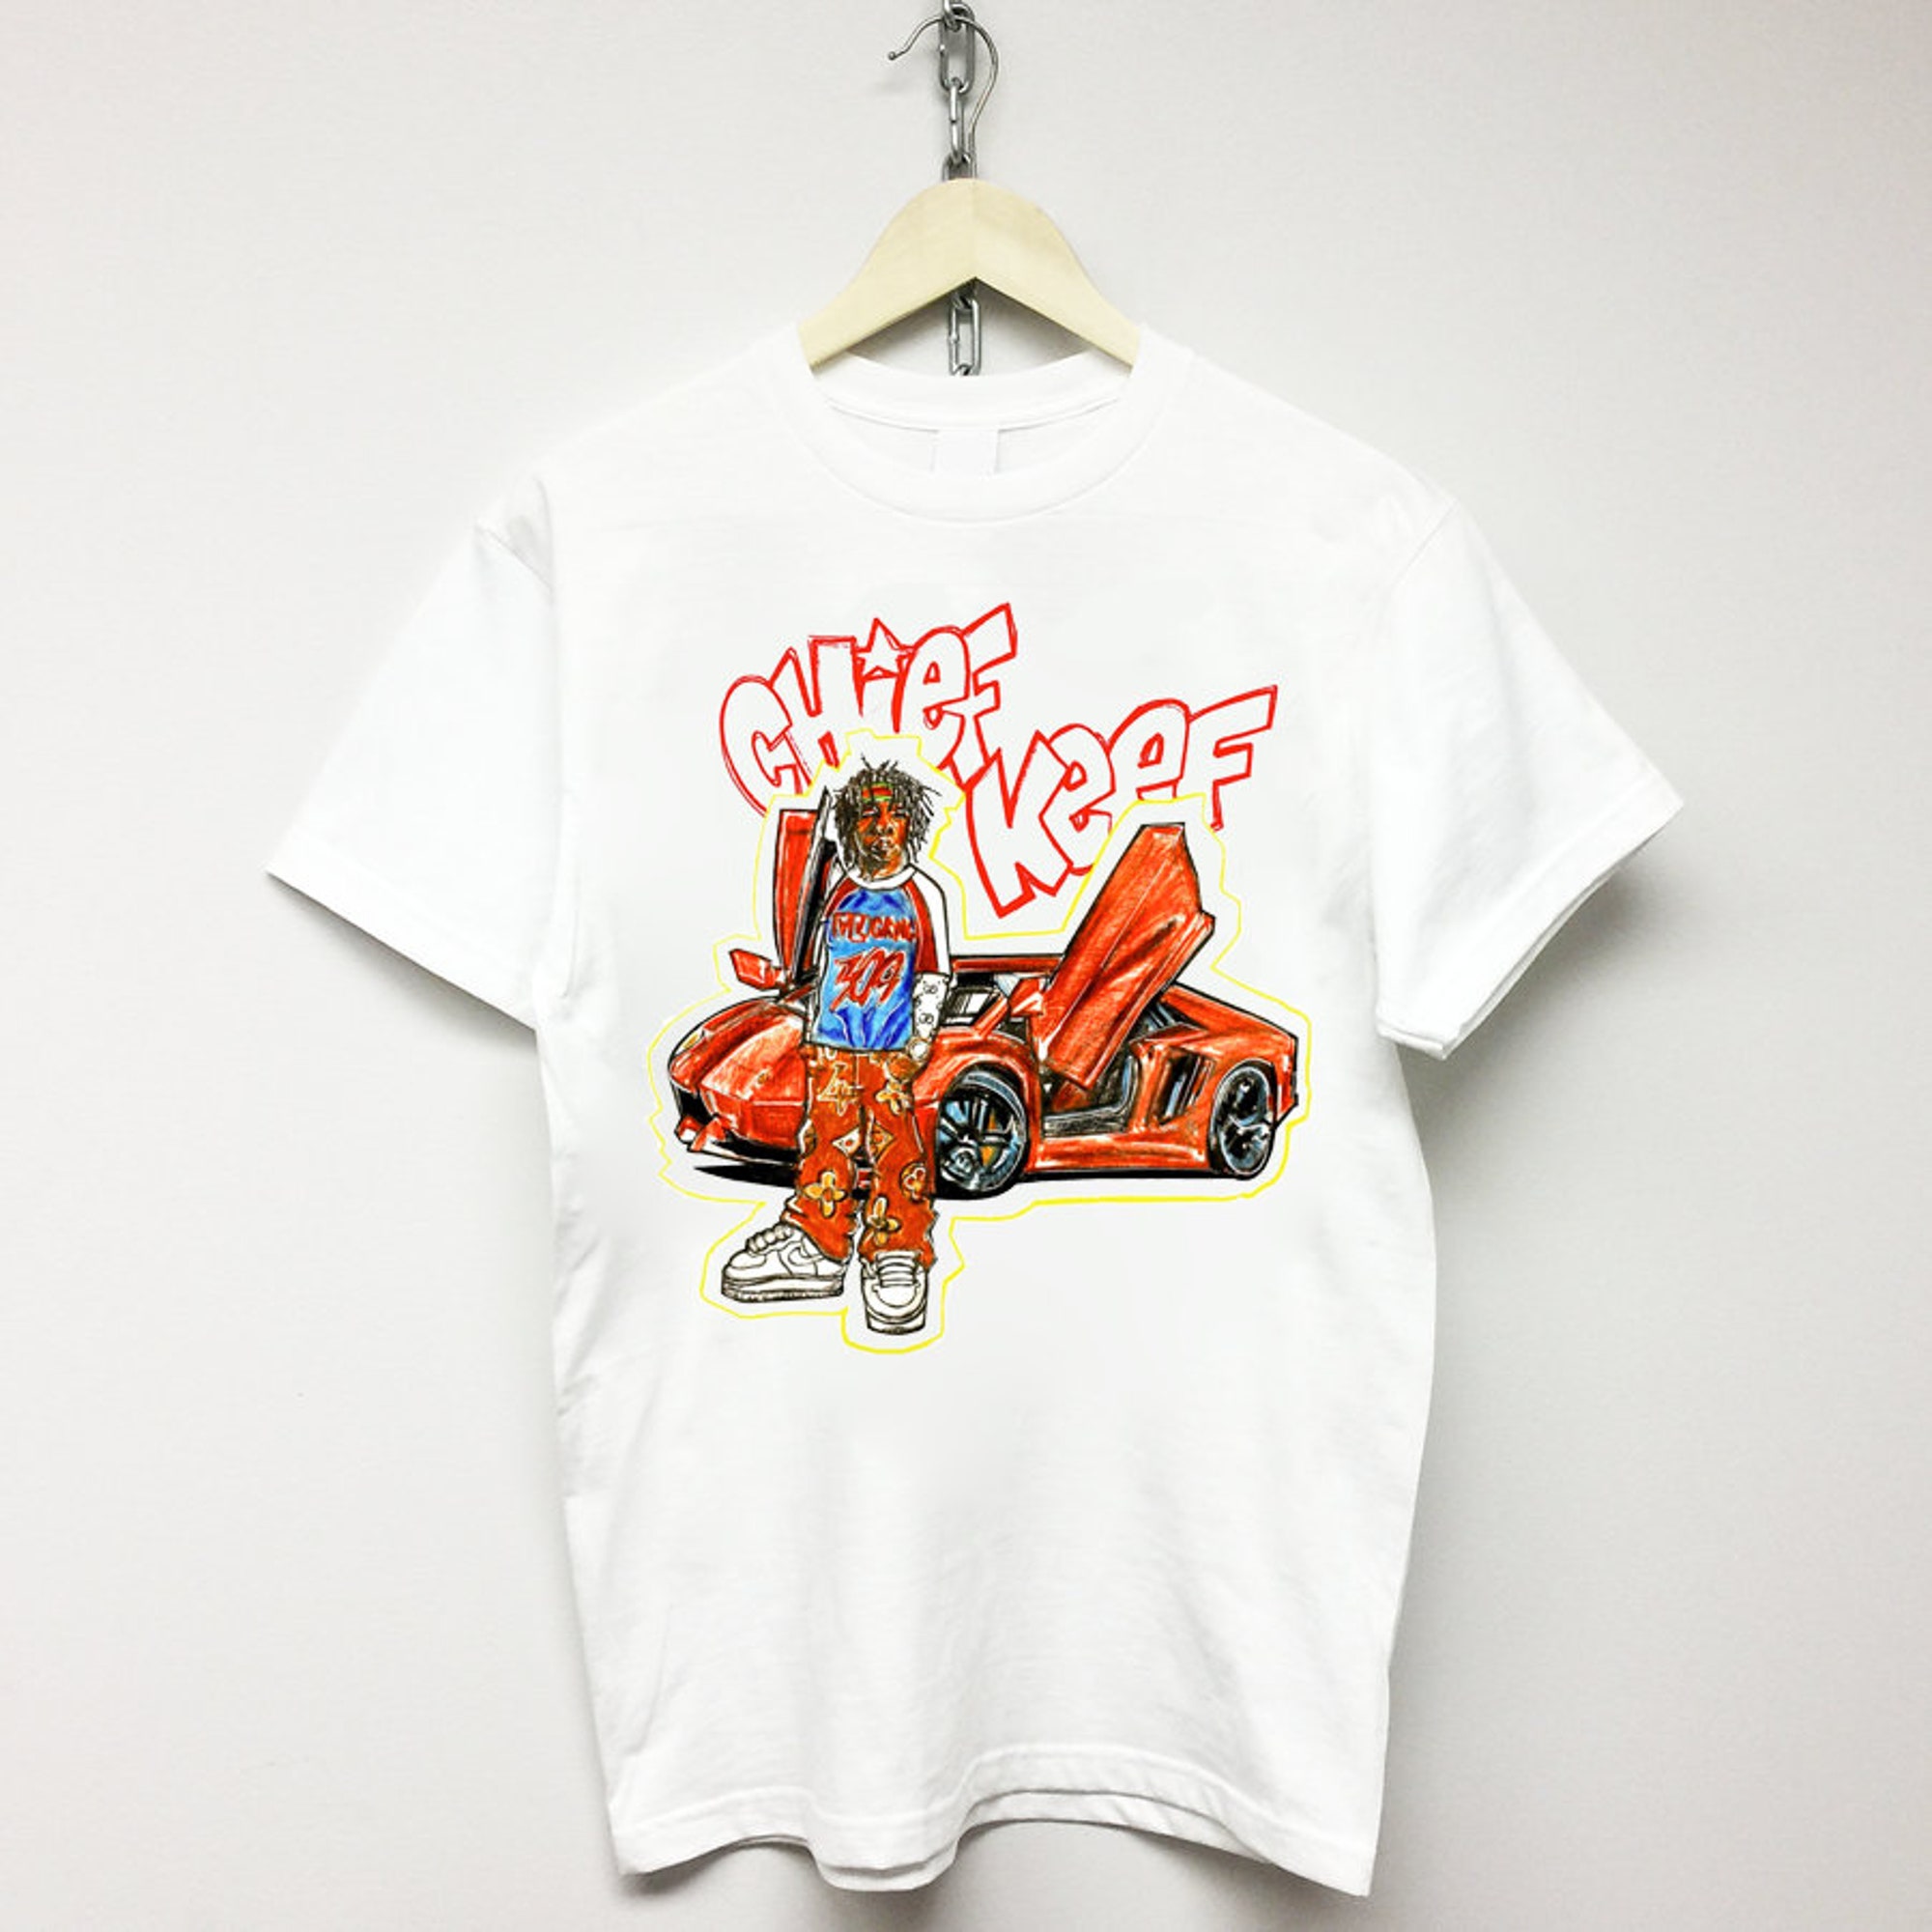 CHIEF KEEF T-SHIRT